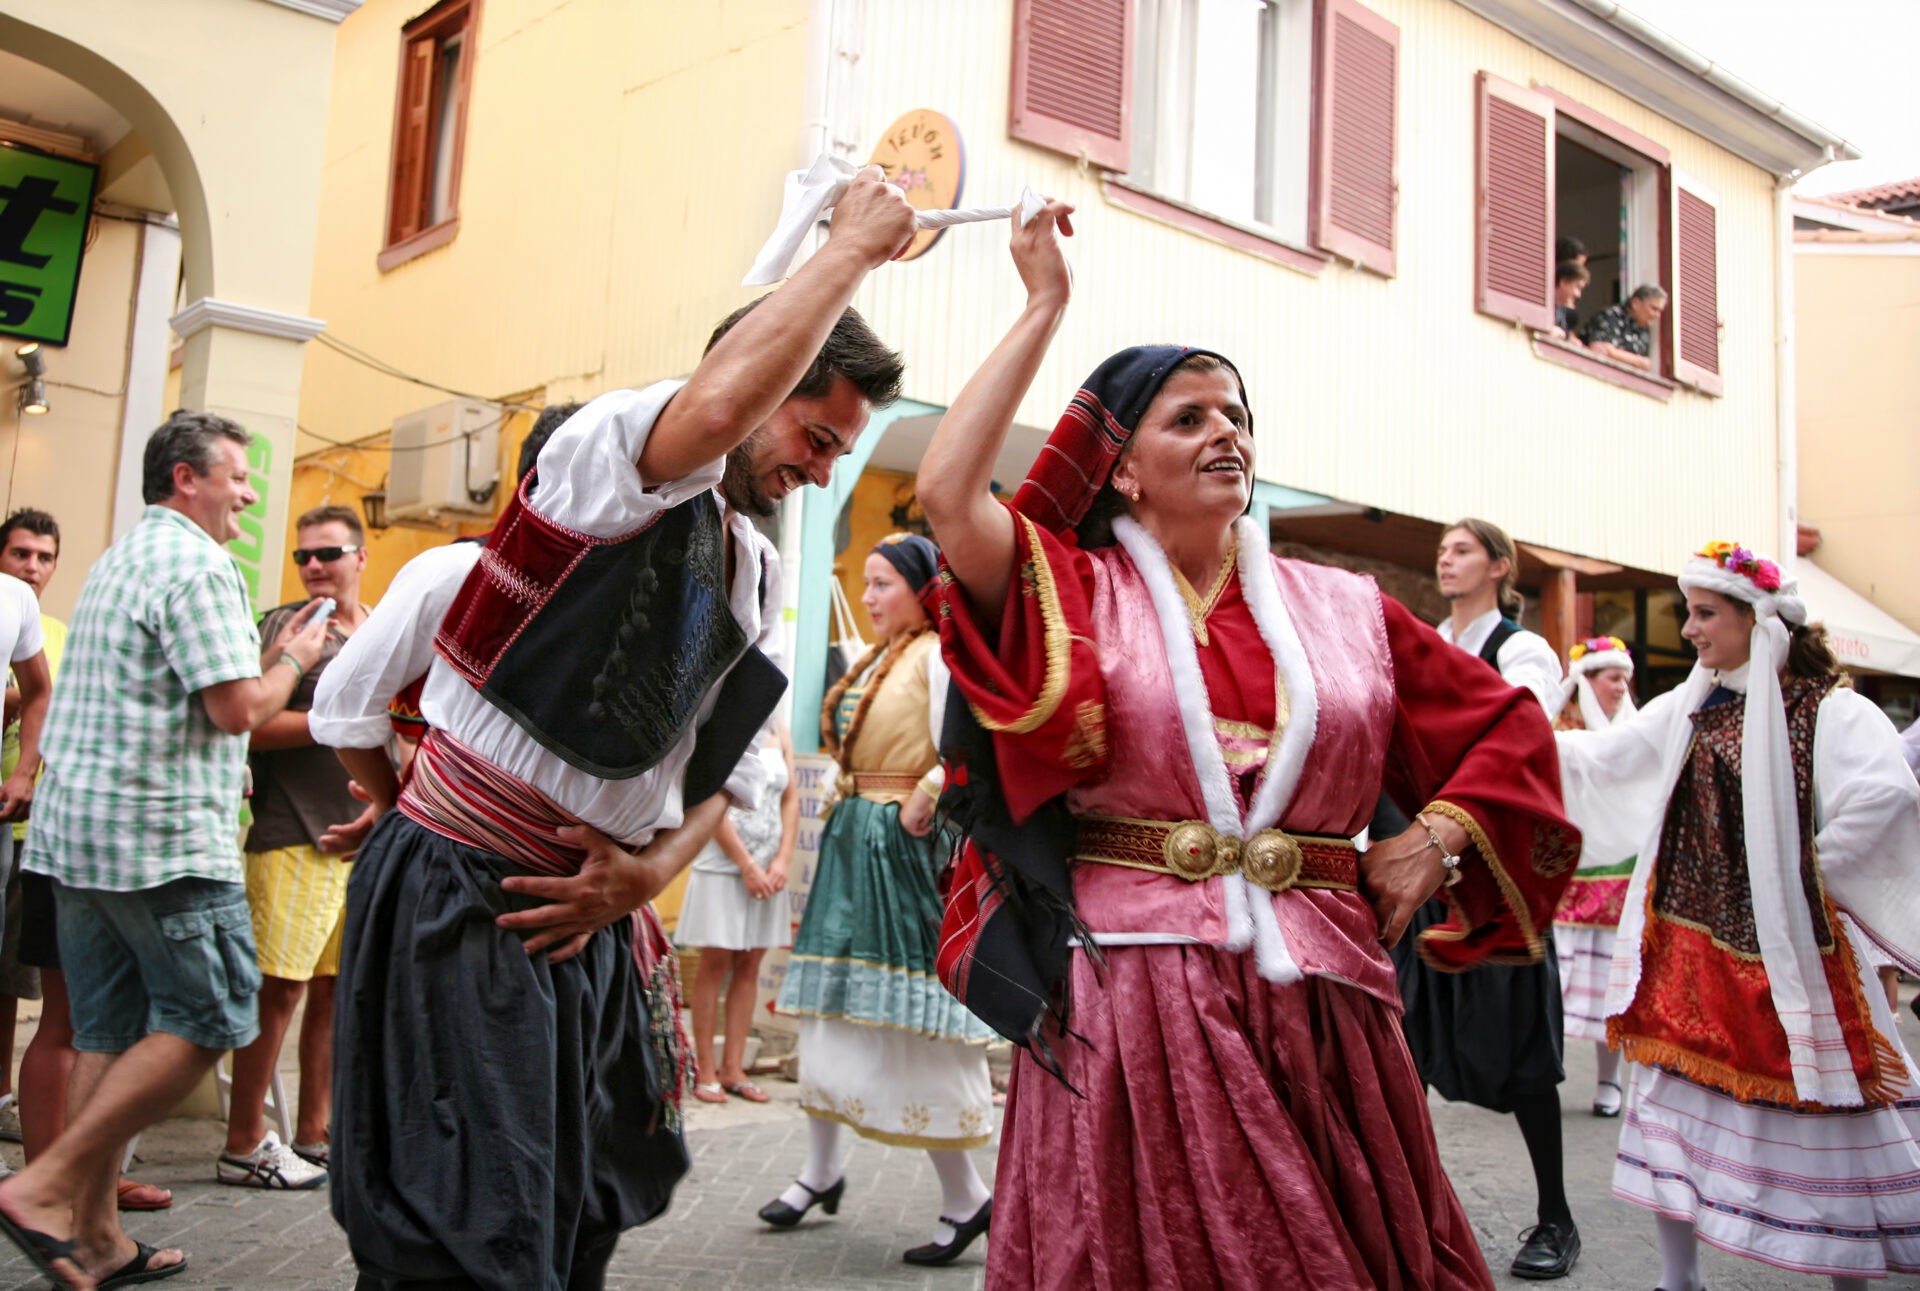 The folklore traditions in the villages of middle Corfu